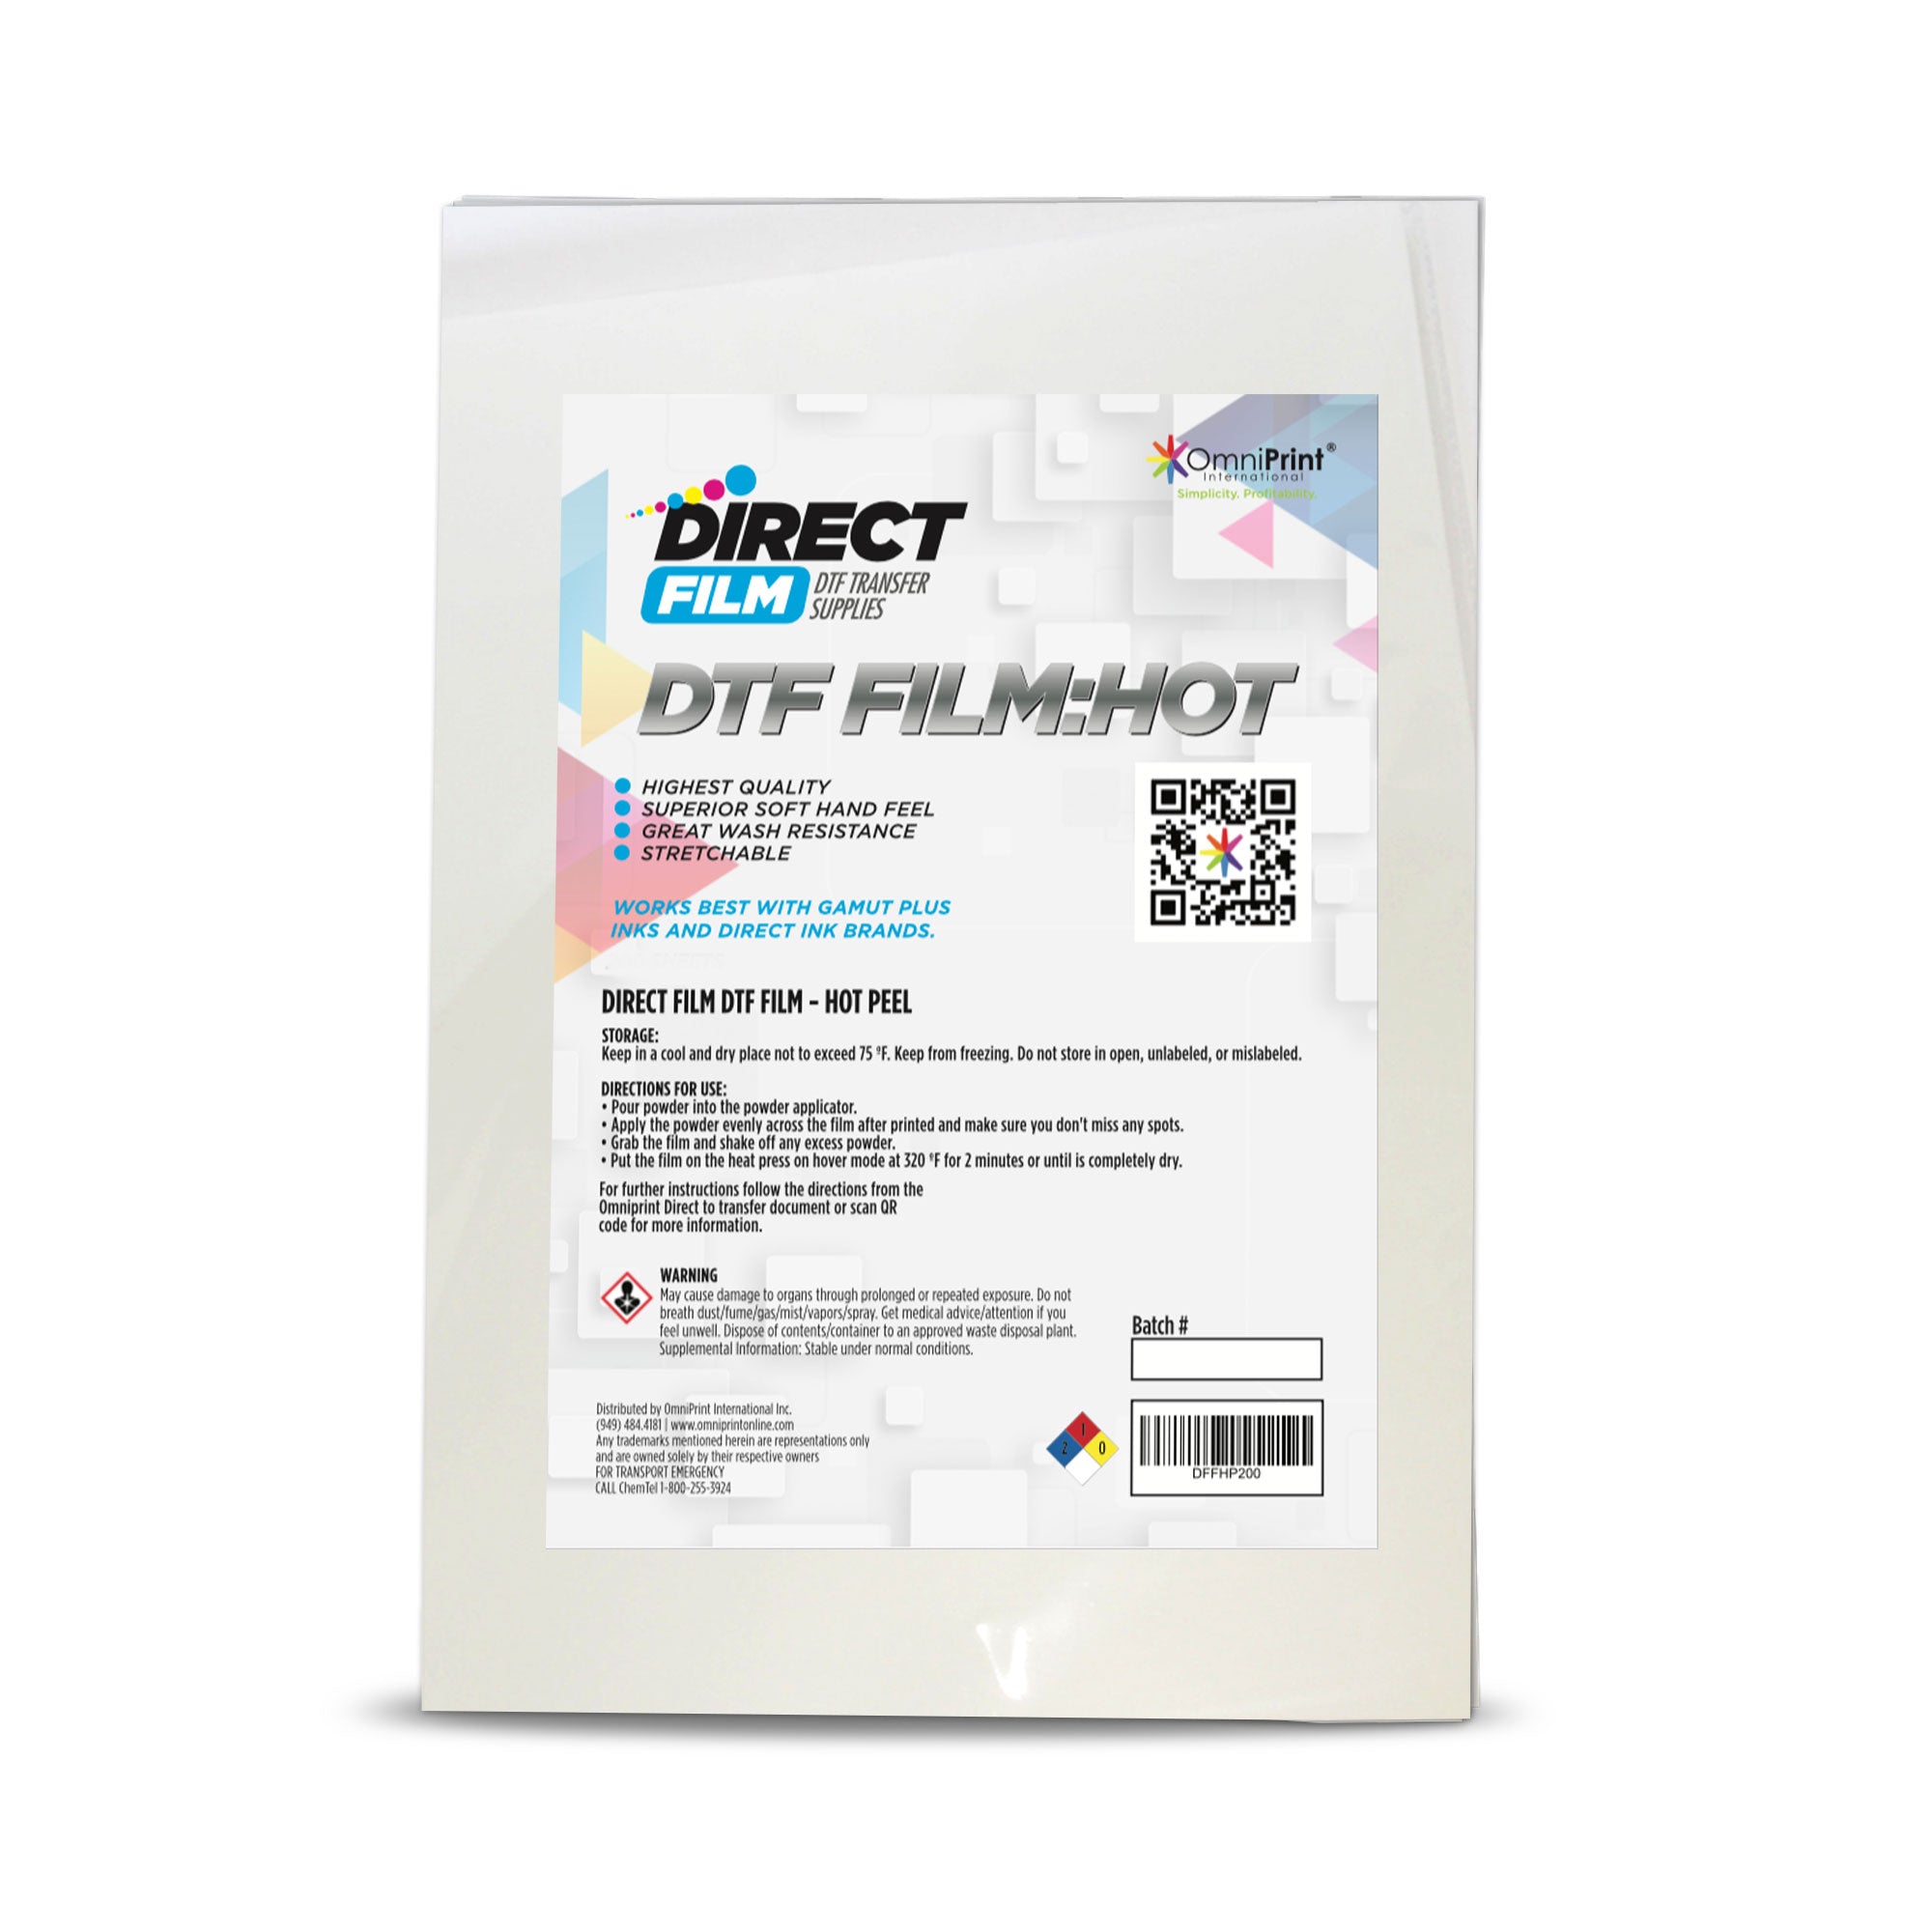 BCH Premium DTF Transfer Film - 100 A4 Sheets Bulk Package for Direct to  Film Printing- Cold & Hot Peel - Size: A4 (8.5 x 11.75 or 210 mm x 297 mm)